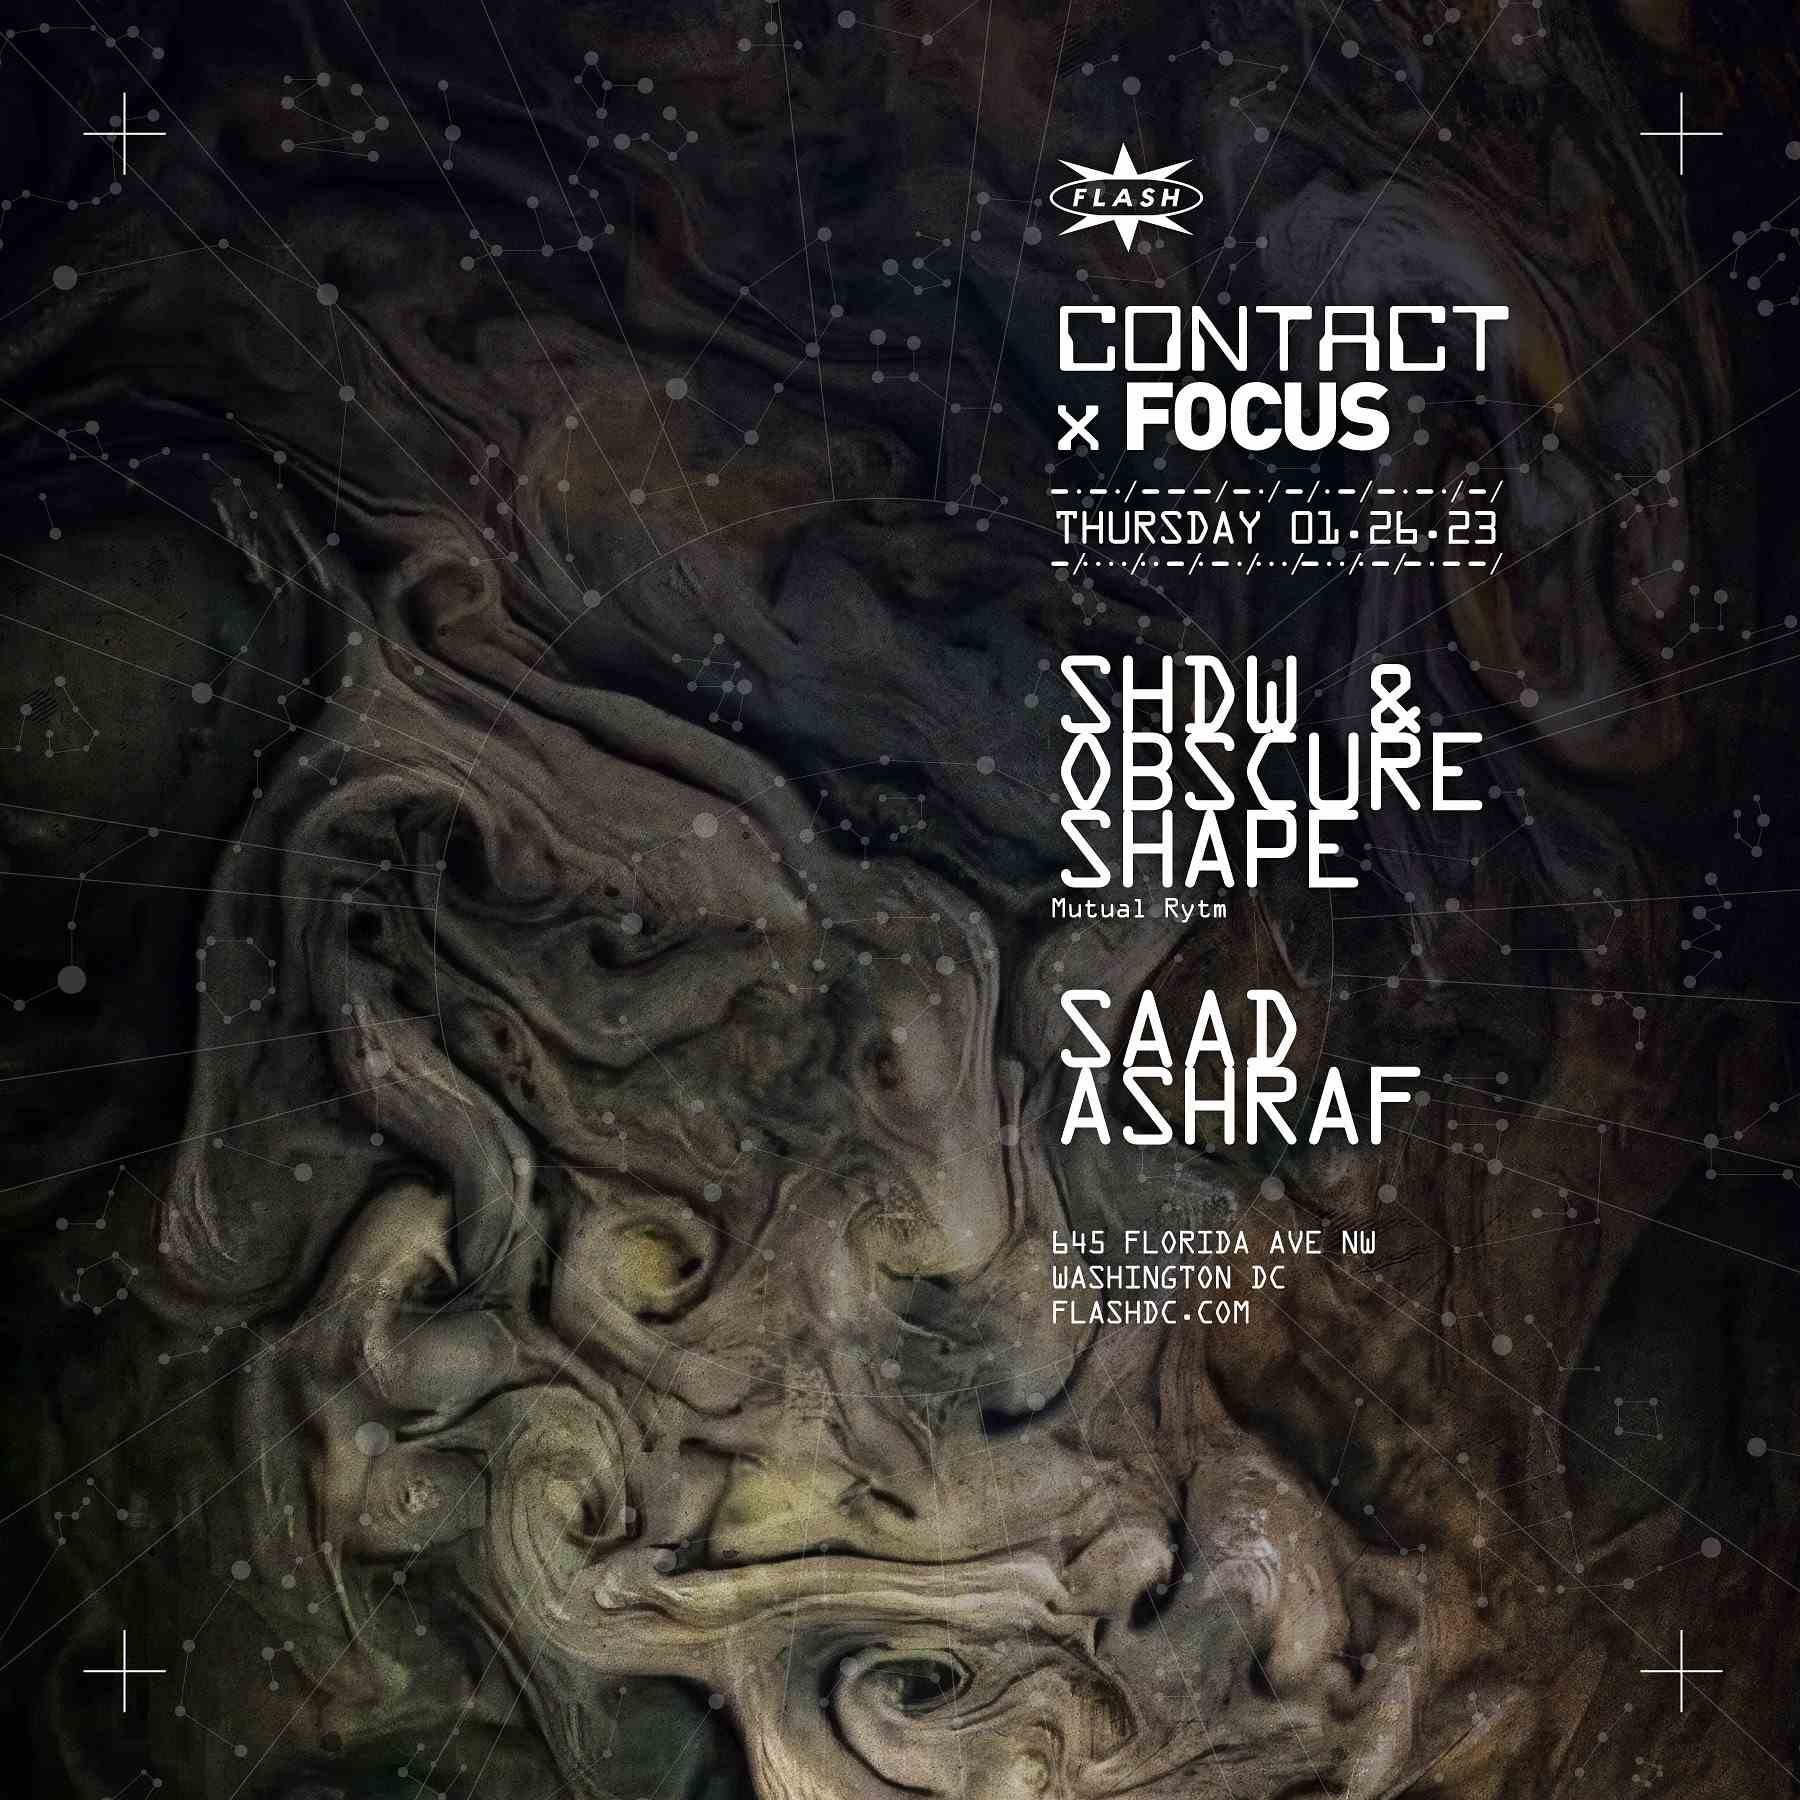 Event image for CONTACT x FOCUS: SHDW & Obscure Shape